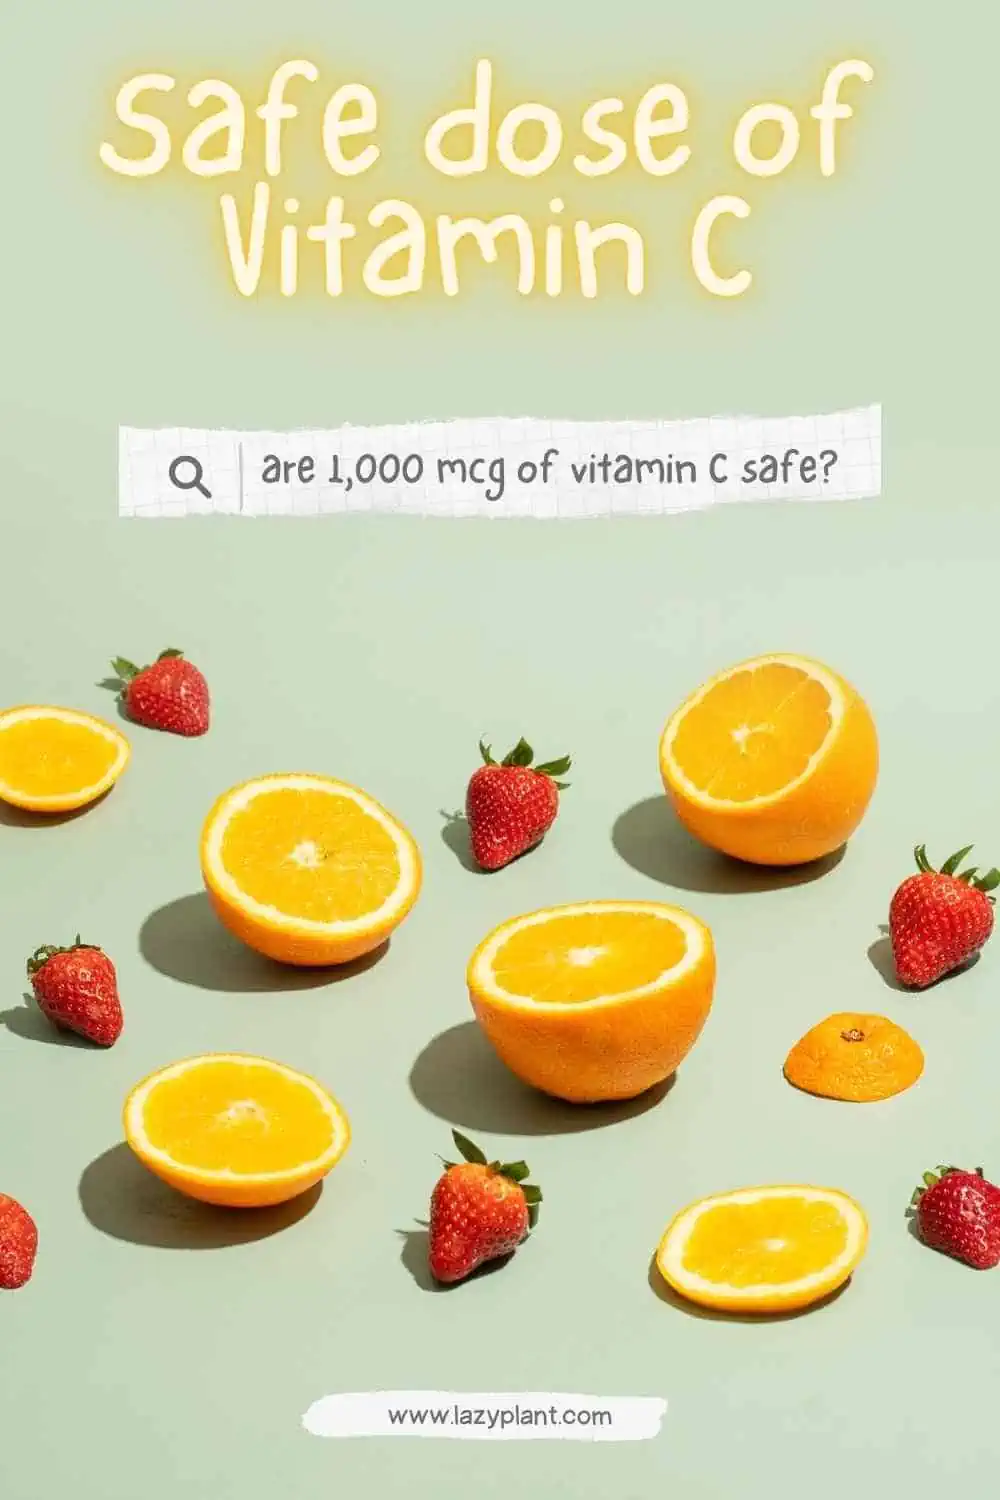 Can I get 1,000 mg of vitamin C a day?